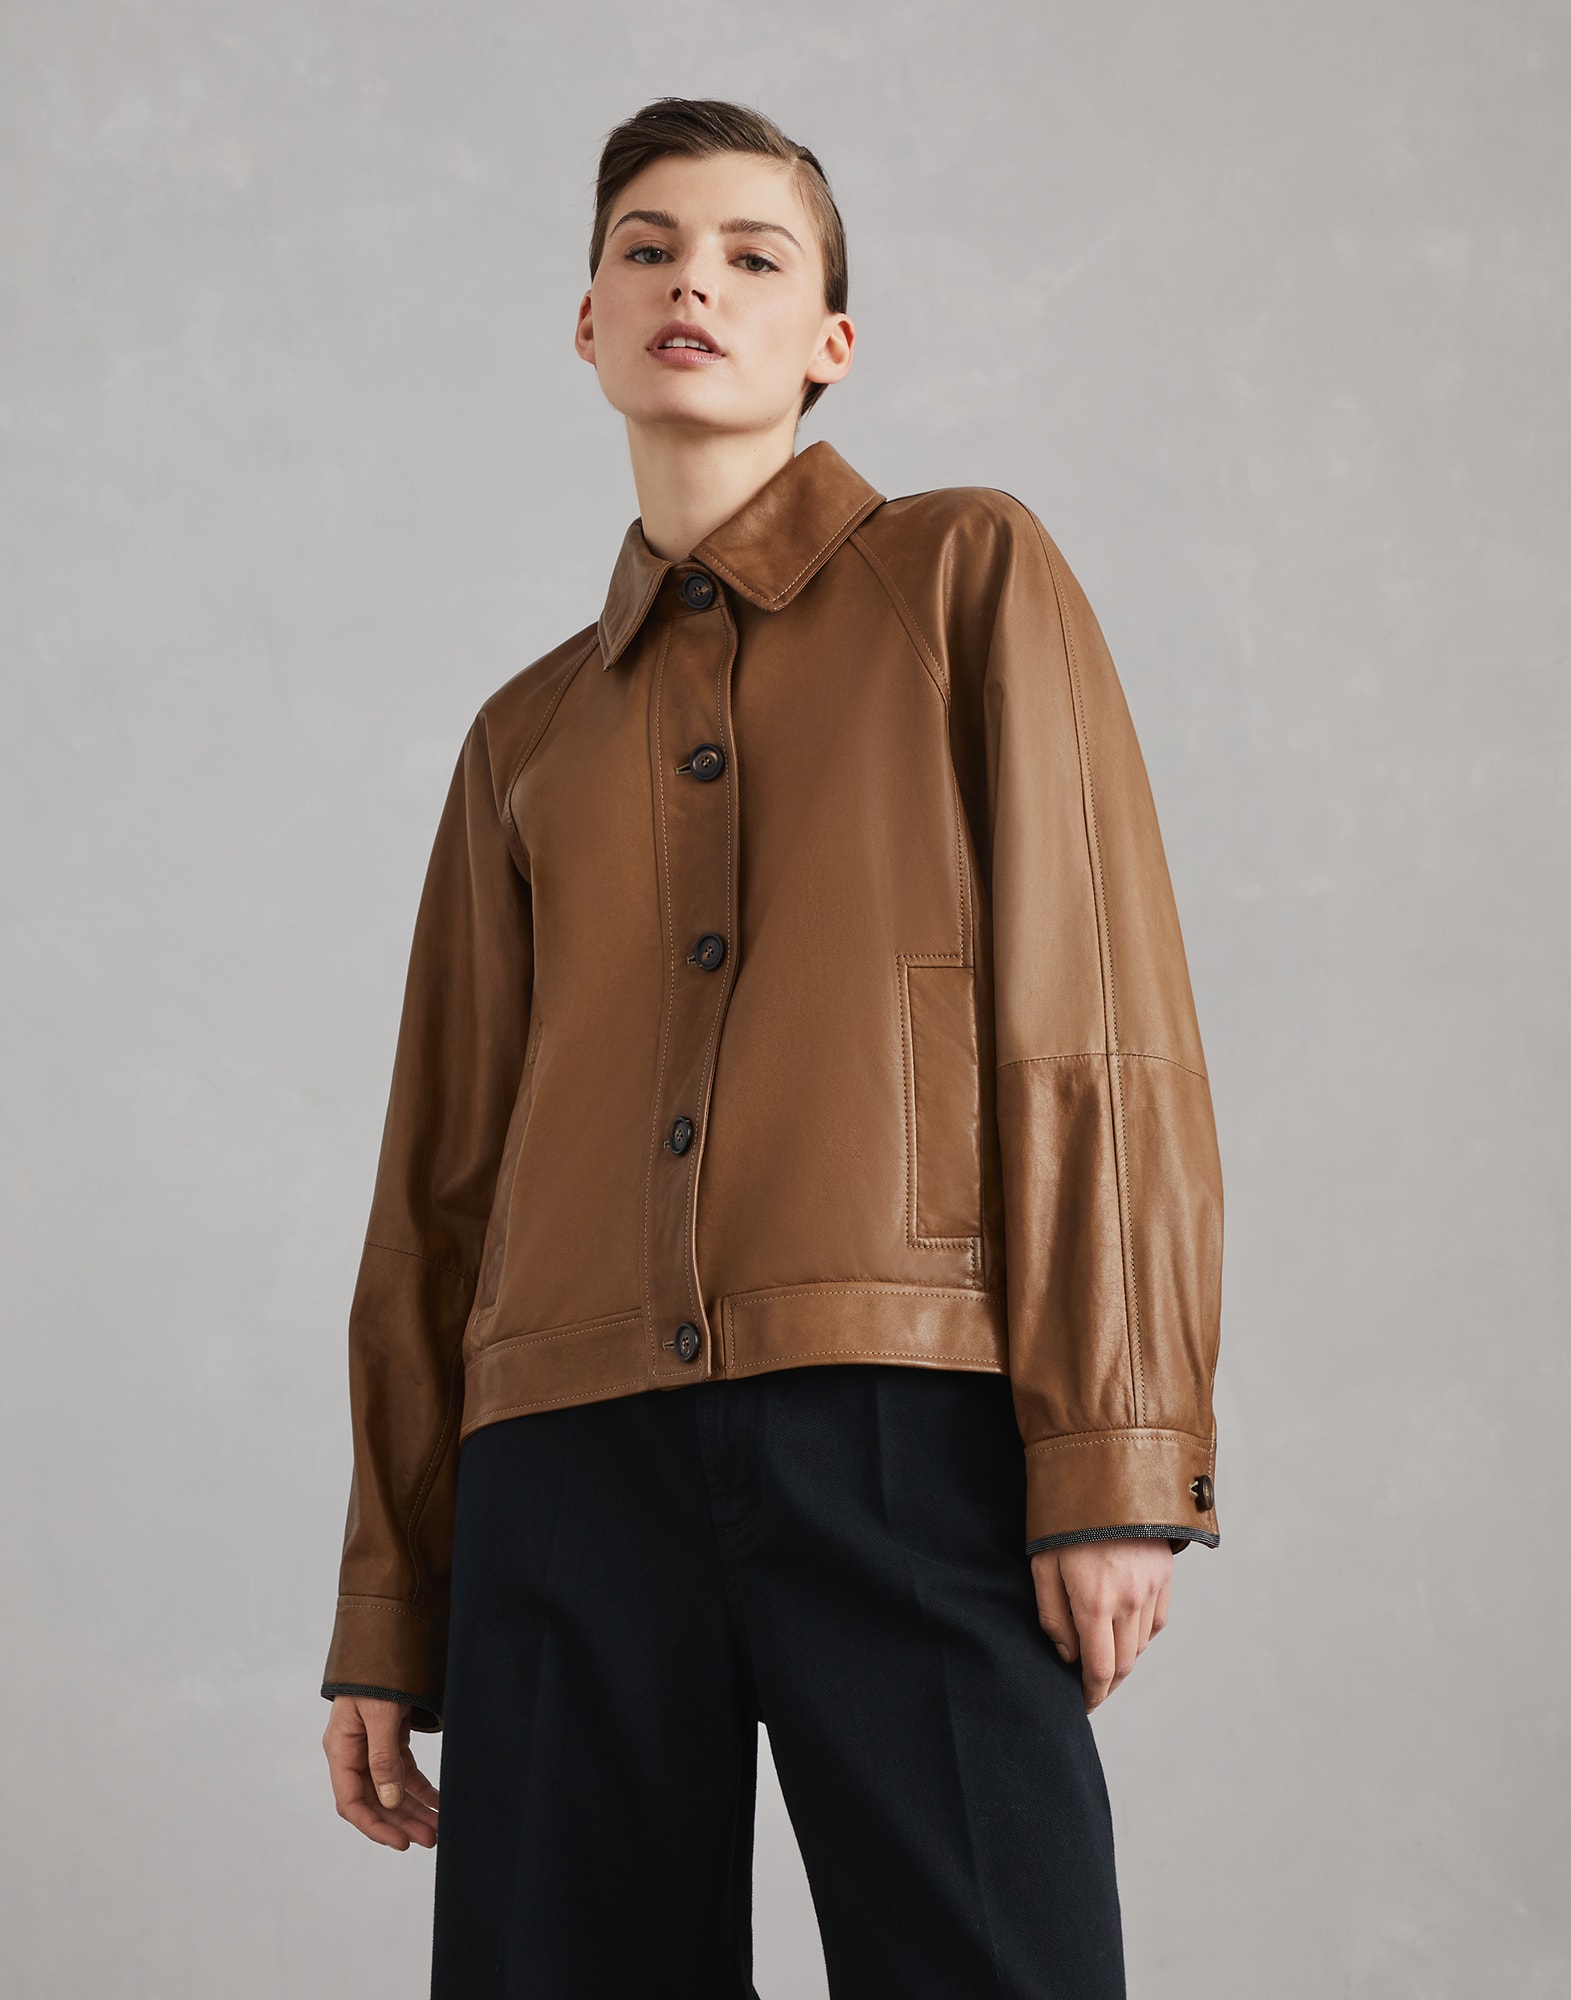 Outerwear in nappa